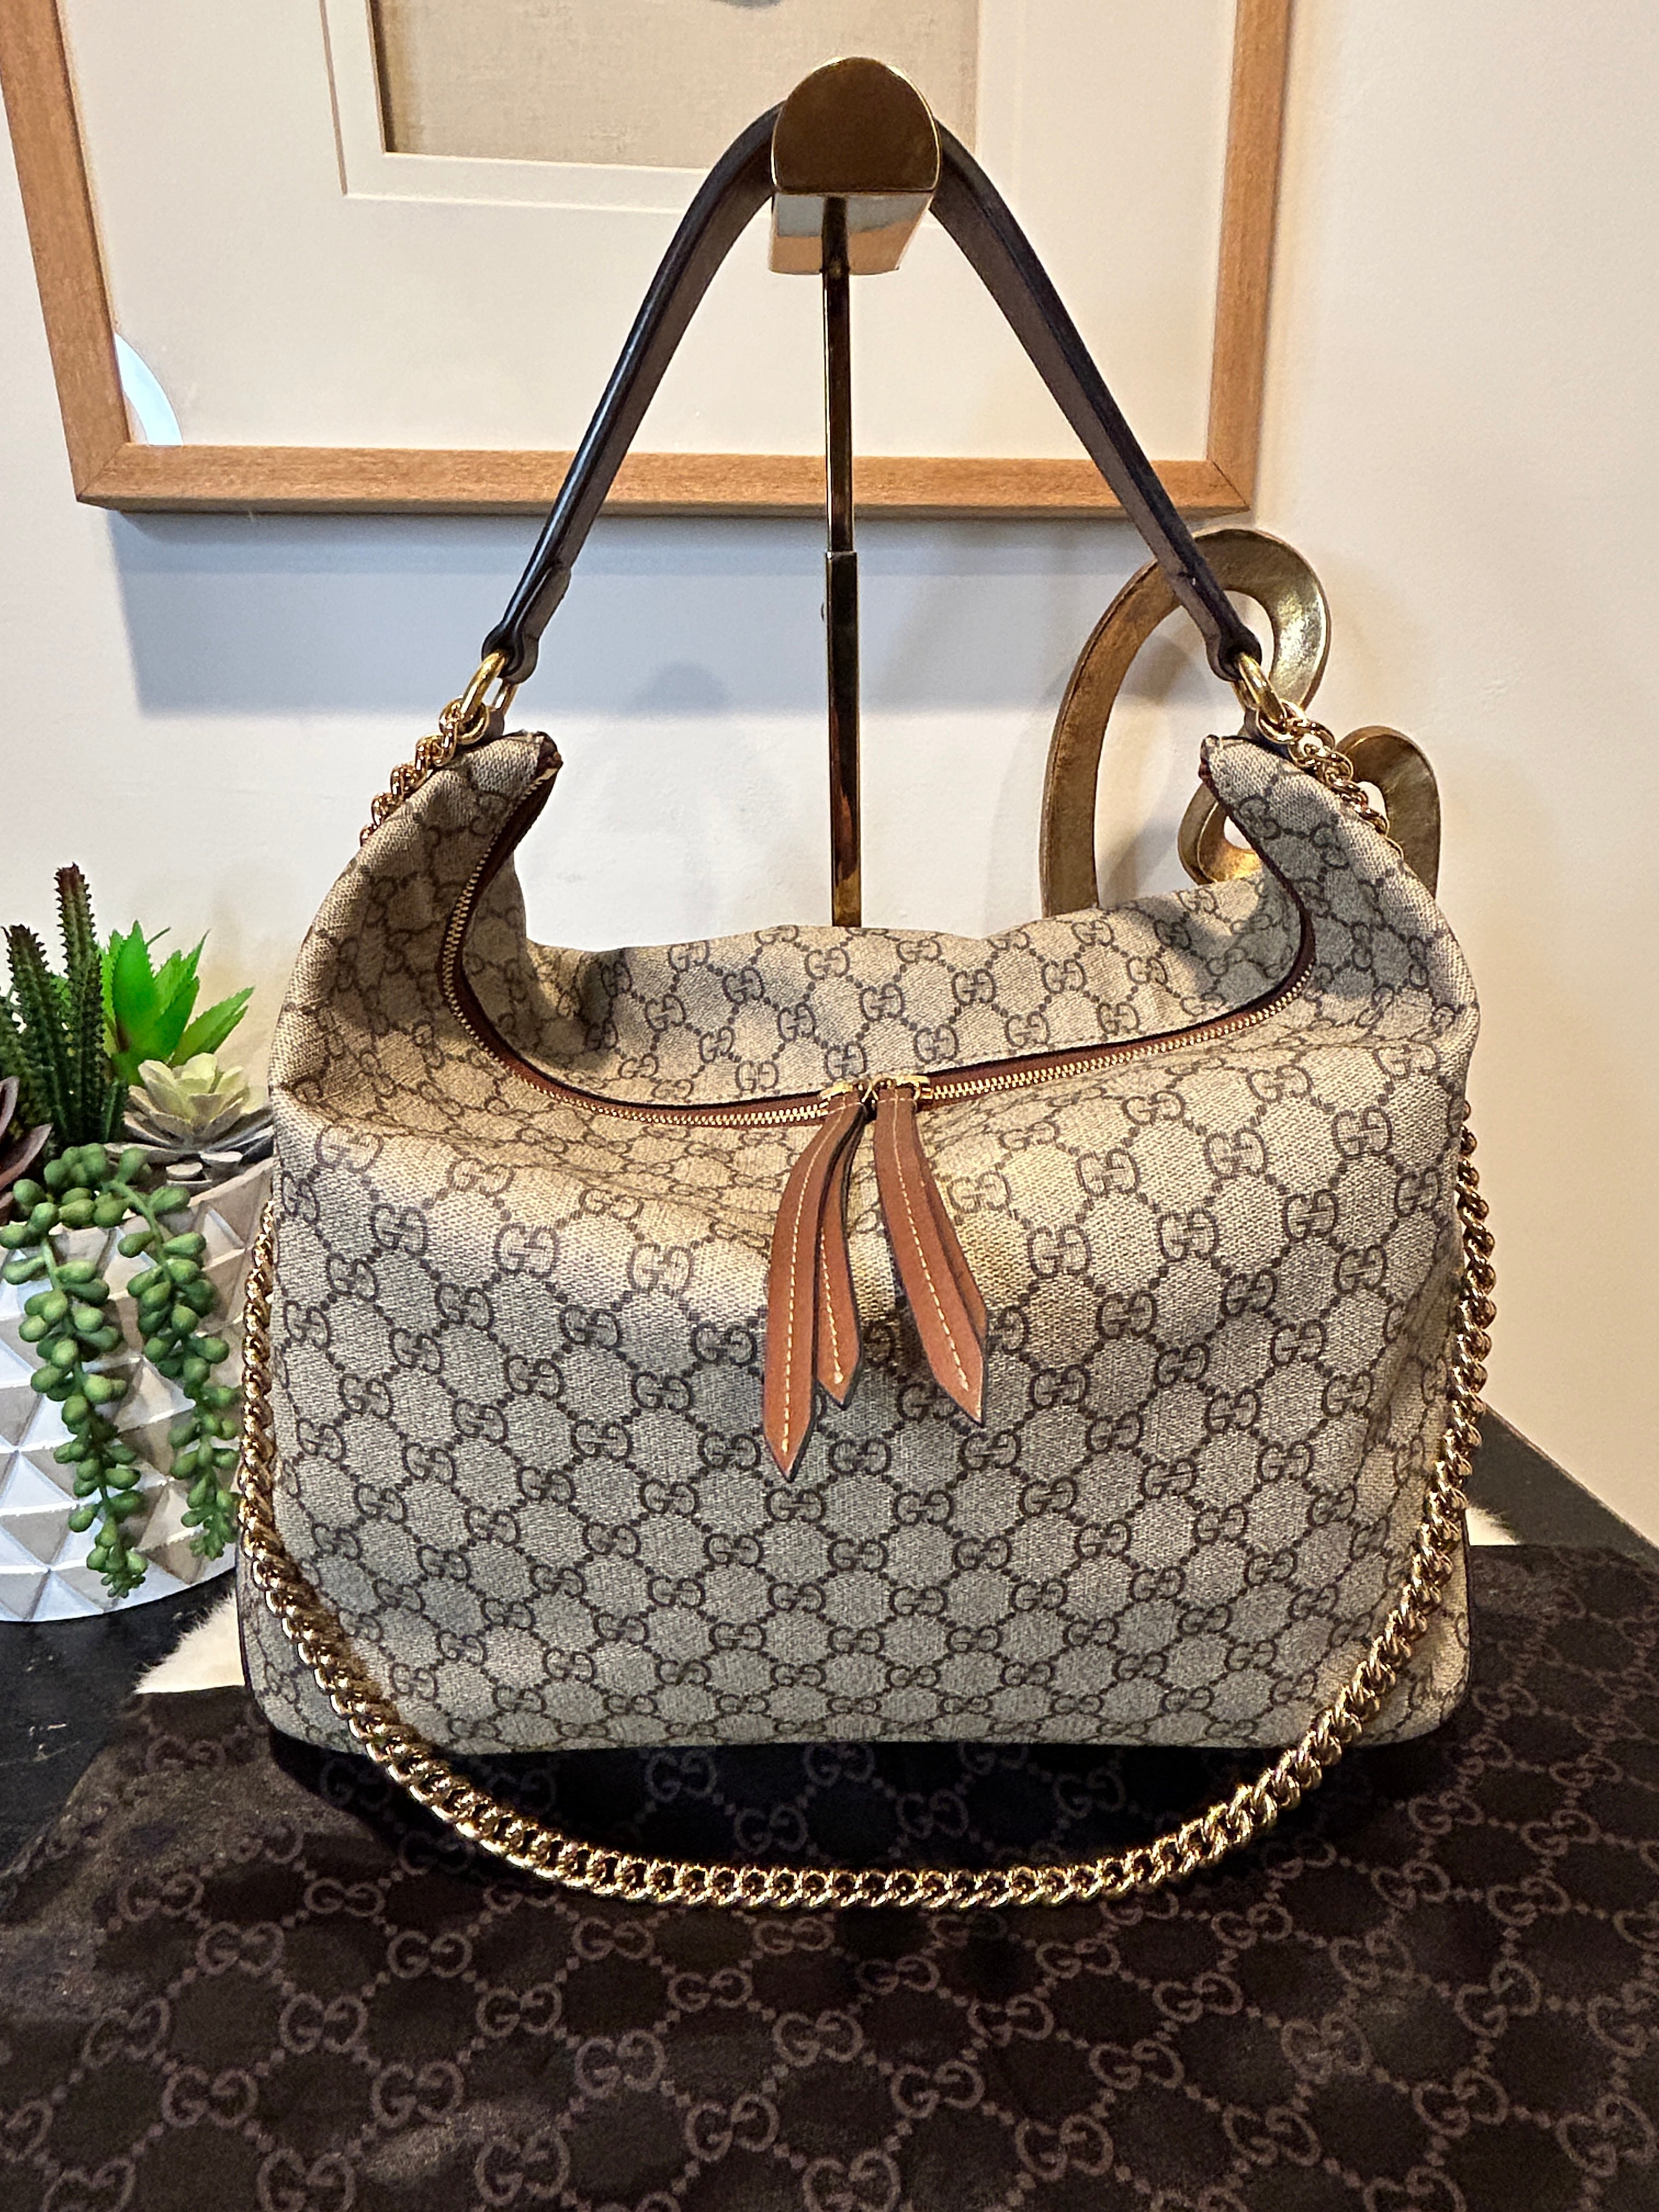 ep_vintage luxury Store | GUCCI richard OPHIDIA MINI HOBO HANDBAG | FREE  SHIPPING – dct | Dct Vintage - Authentic luxury Brand items from Japan